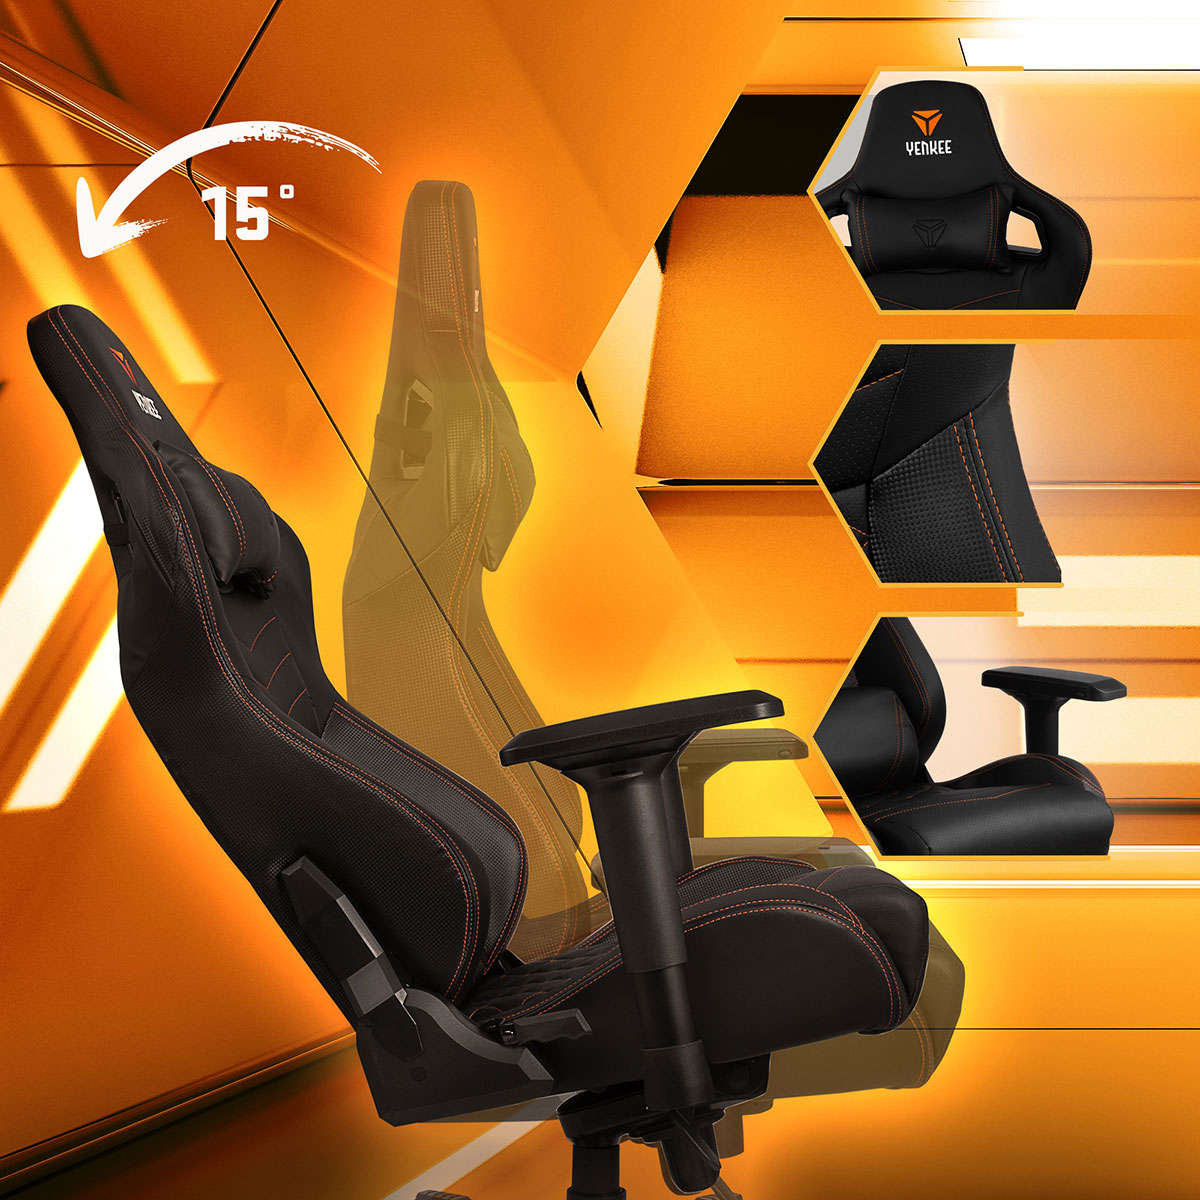 A rocking gaming chair?